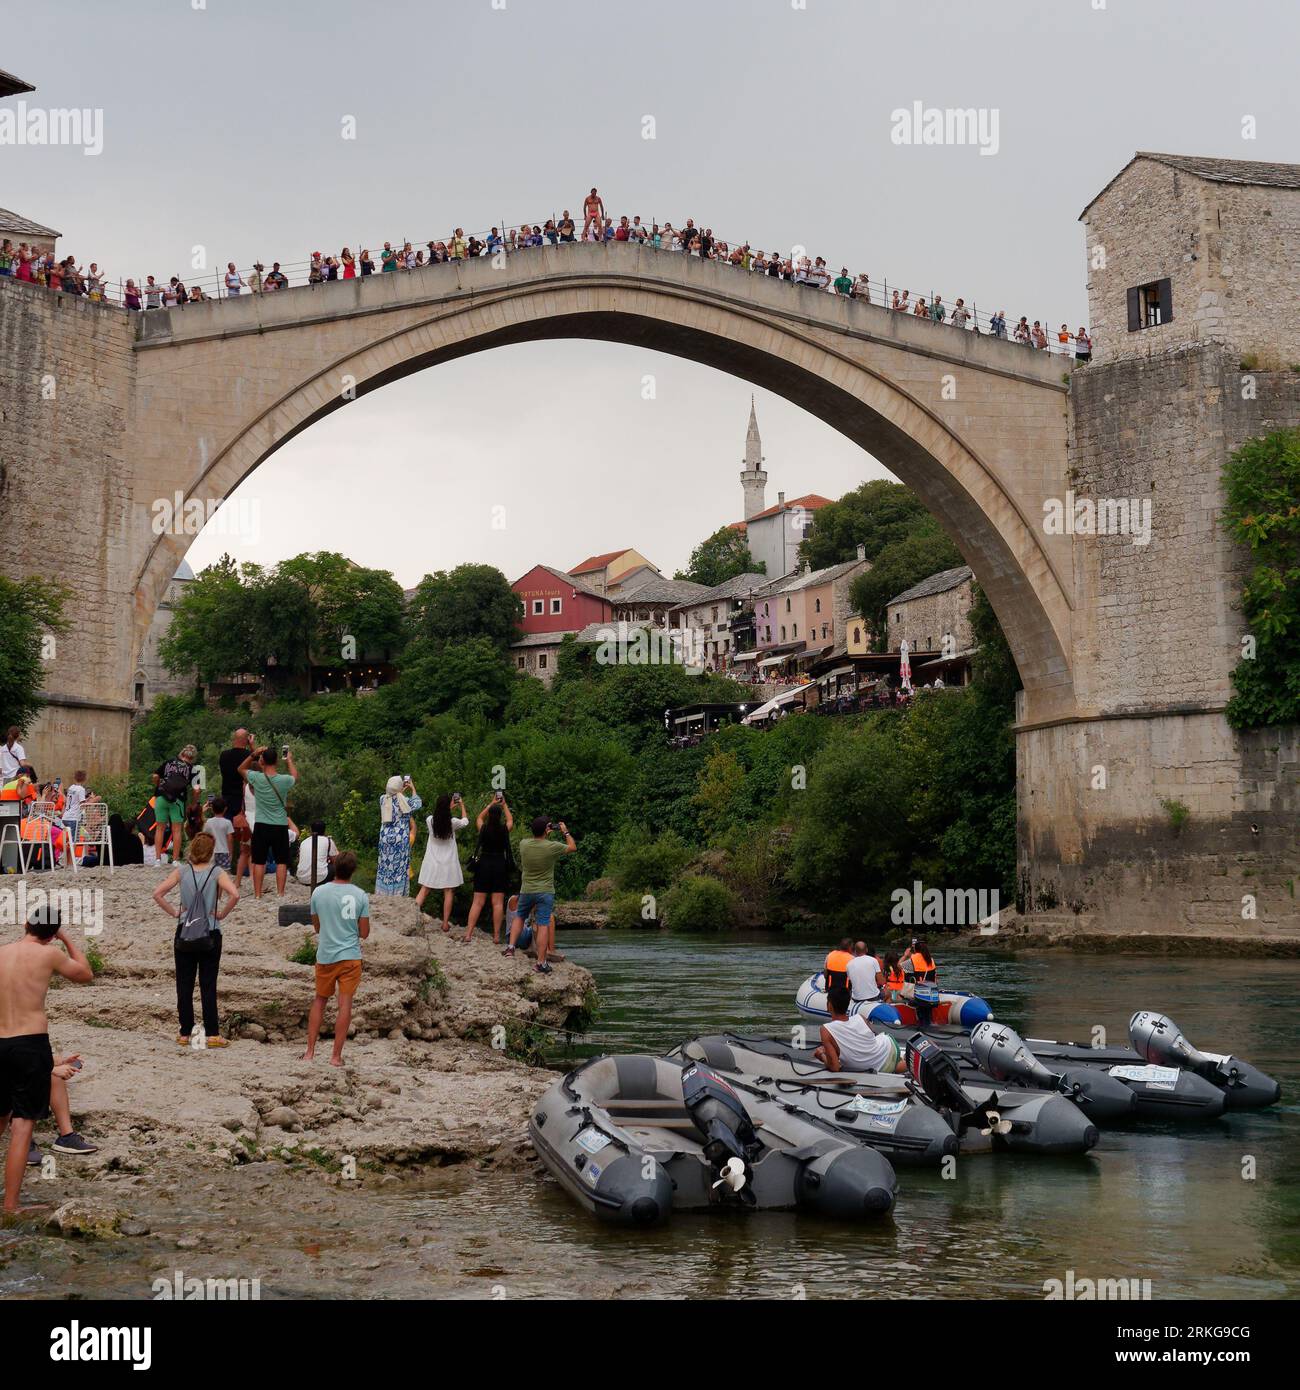 People gather to watch a Bridge Jumper as he prepares to jump from Stari Most (Old Bridge) Mostar, Bosnia and Herzegovina, August 23, 2023. Stock Photo